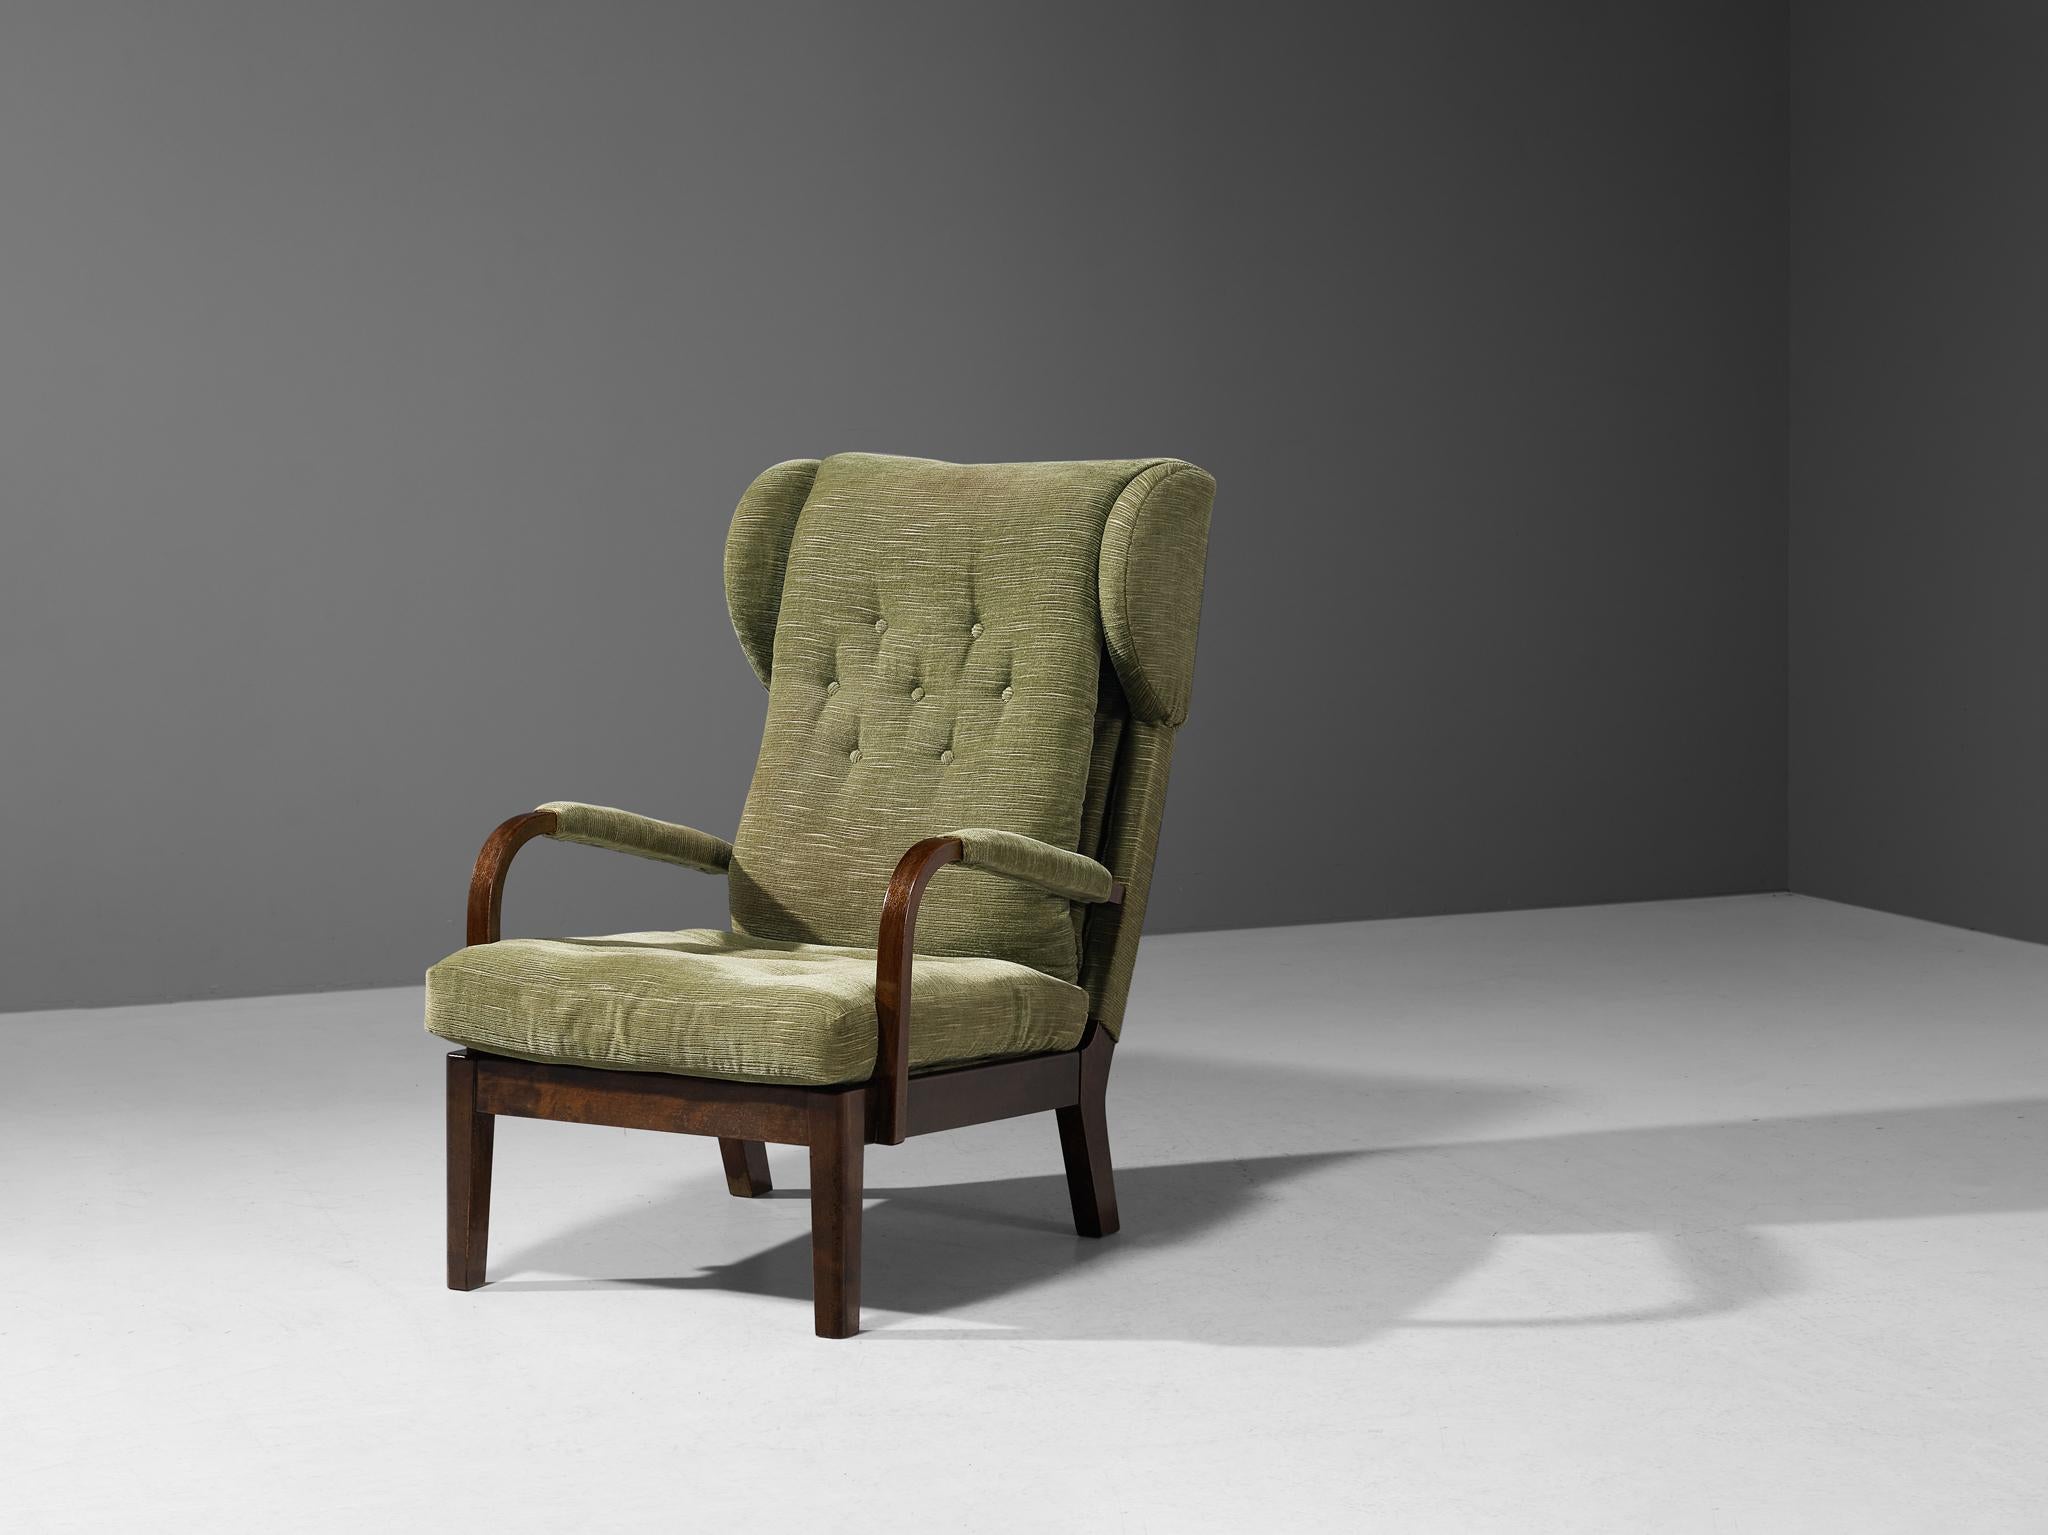 Easy chair, fabric, beech, metal, Sweden, circa 1930

This lounge chair is based on a solid construction featuring delicate lines and shapes. The back has a grand look due to the elongated shape and large ears that hold the cushions in a graceful